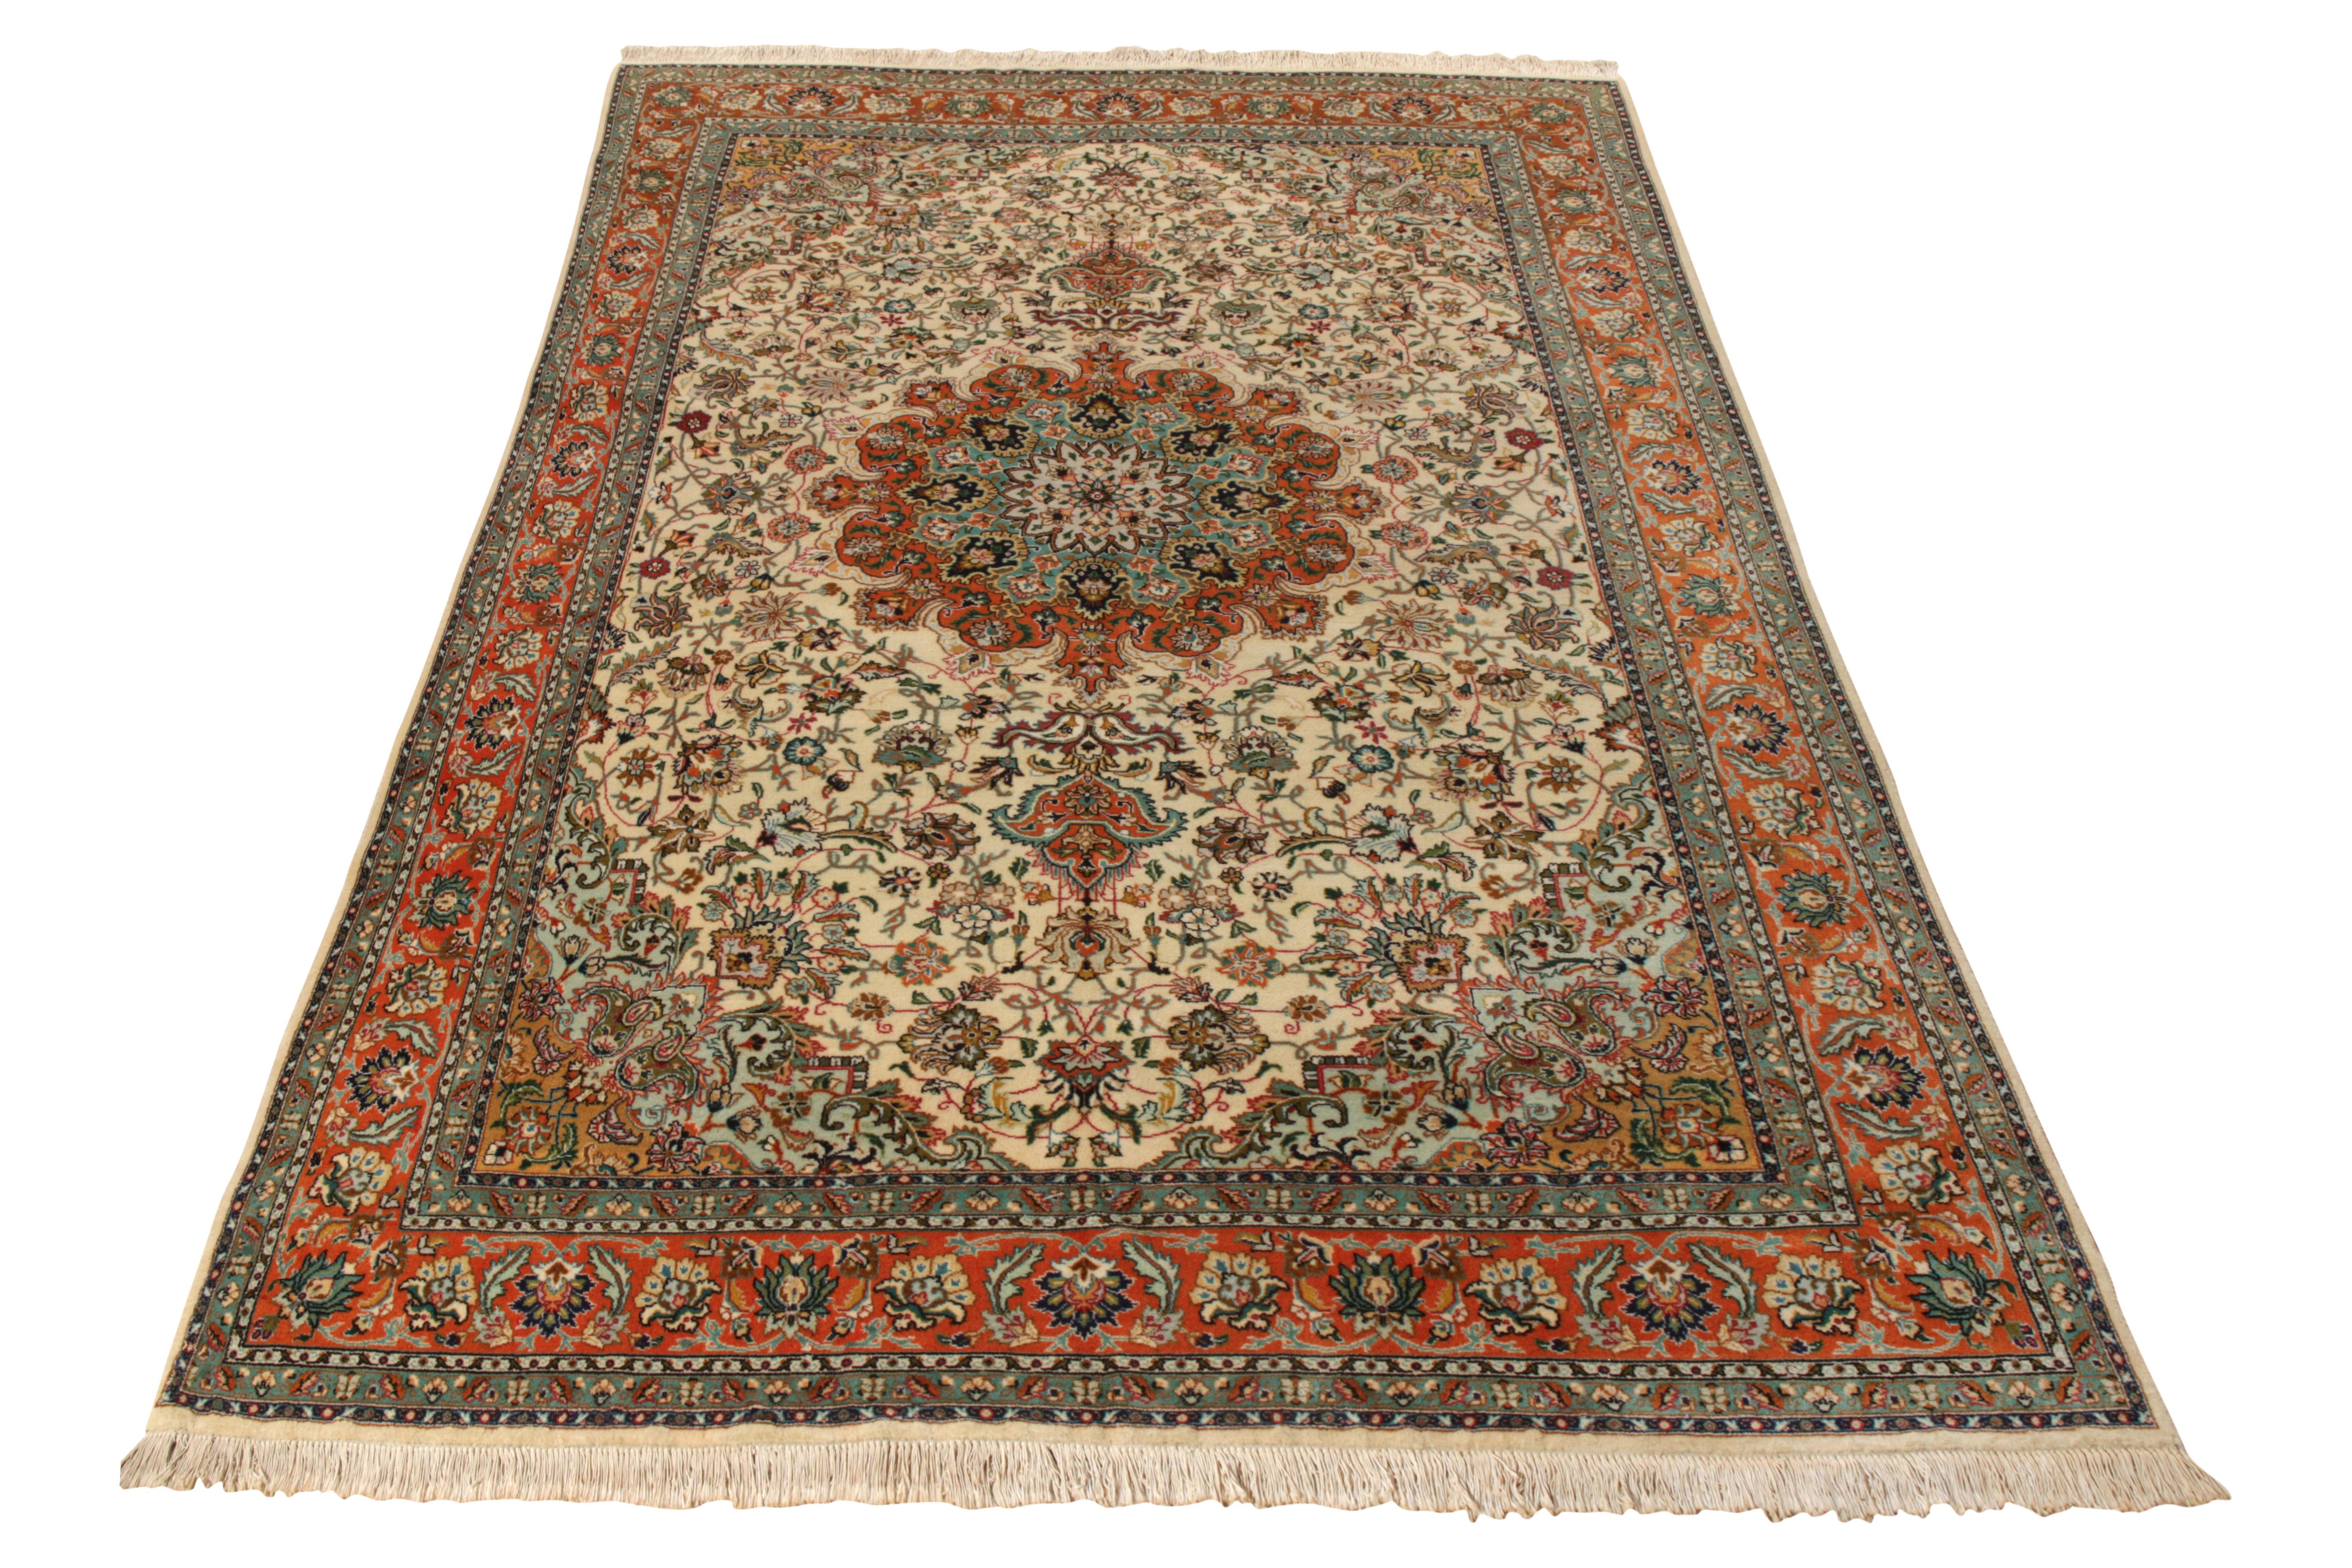 Hand-knotted in wool, this mid-century Tabriz rug joins Rug & Kilim’s Antique & Vintage collection. Exhibiting an impeccable show of craftsmanship, this 6x10 vision enjoys an extravagant vision with an alluring medallion pattern unfurling into an